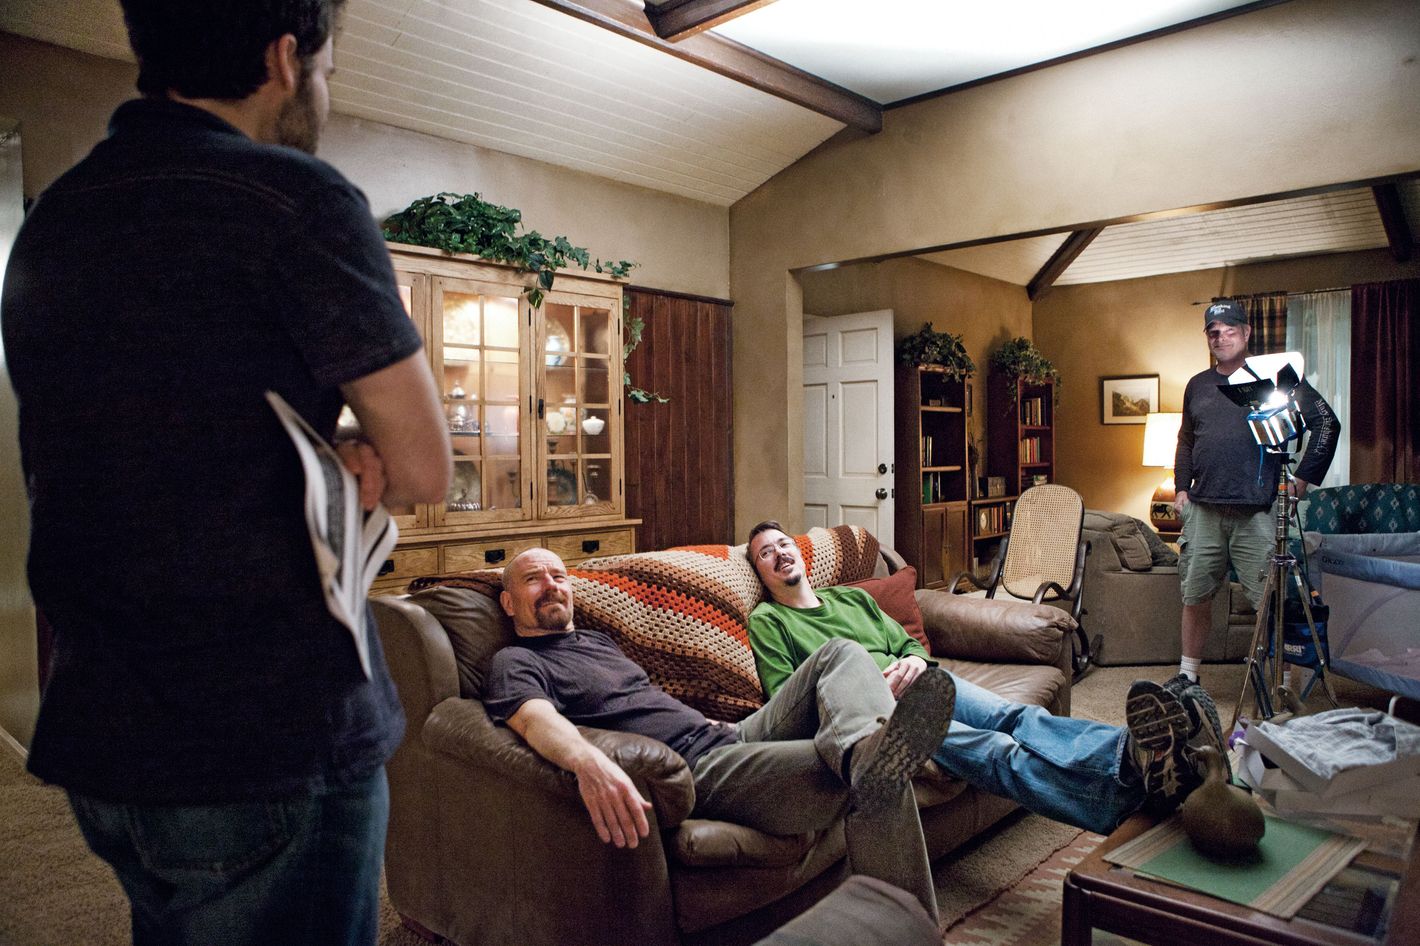 Inside the Breaking Bad writers' room: how Vince Gilligan runs the show, Breaking  Bad